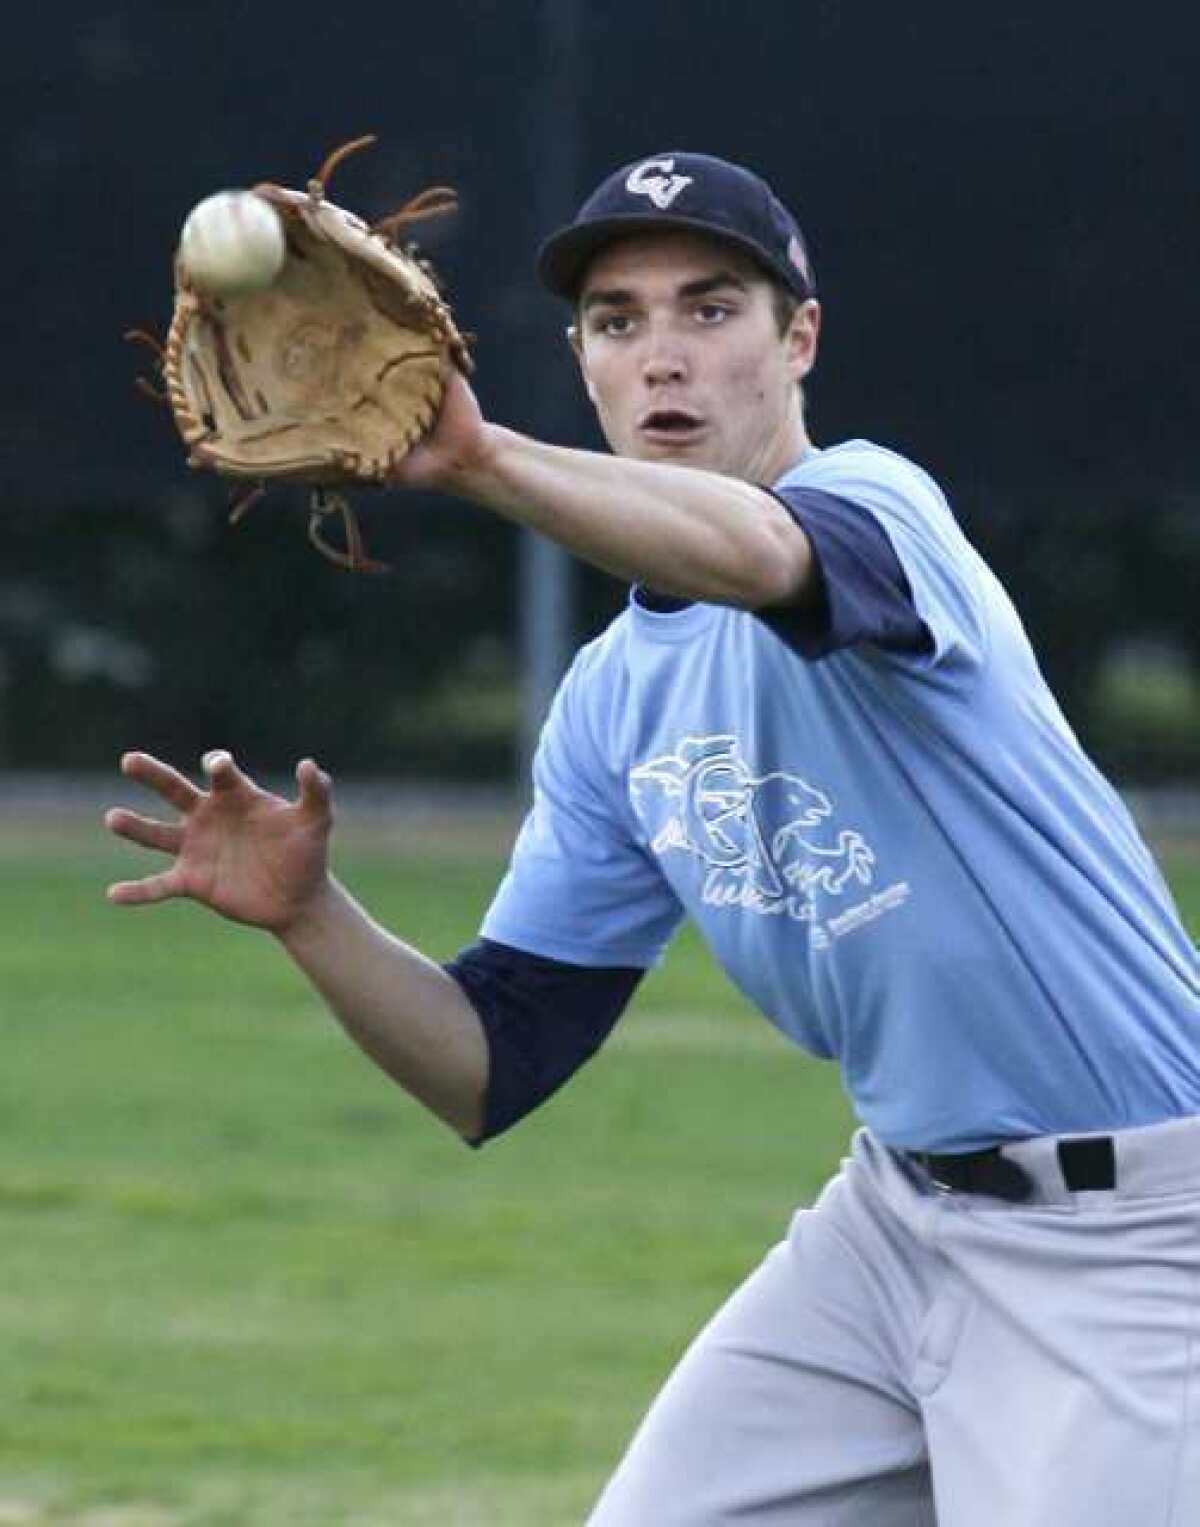 Crescenta Valley's Ted Boeke practices at Stengel Field in Glendale on Wednesday, February 20, 2013. Boeke's team and Glendale High School will compete Saturday through Wednesday at fields throughout Southern California during the Babe Herman Tournament.